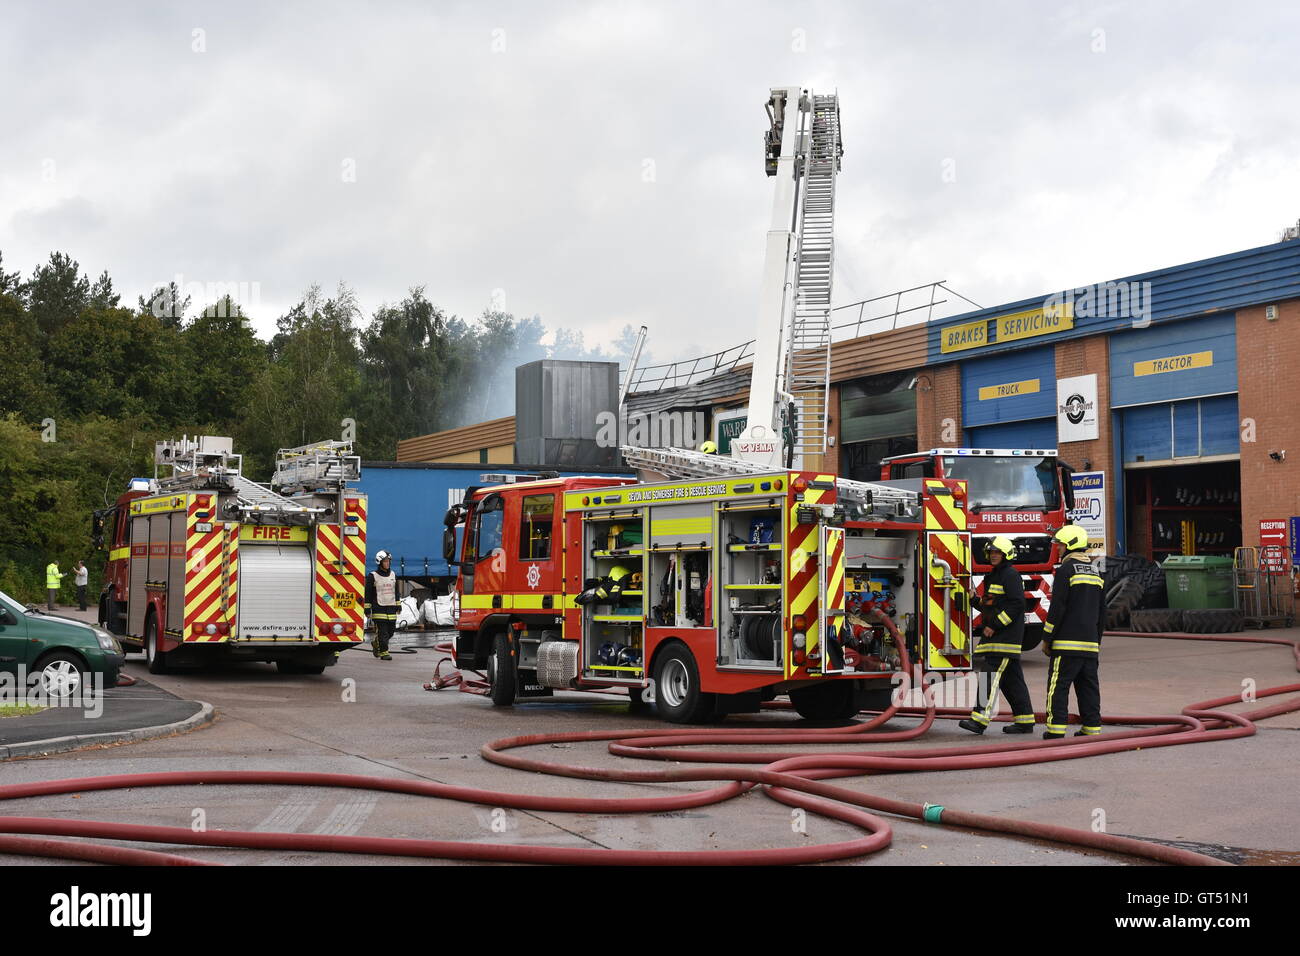 Devon, UK. 9th September, 2016. Tiverton Fire: The scene of a major fire at the premises of Warren Hughes Furniture Makers in Ormidale Square, Tiverton Business Park, Devon, at 16.00 BST on Friday 9th September 2016. The fire brigade were called at 11.23. Five hours later at least 6 fire appliances were still at the scene including two aerial platforms. Staff in the neighbouring units were also evacuated including the premises of North Devon Tyres and National Tyres & Autocare. Credit:  Tim Squires/Alamy Live News Stock Photo